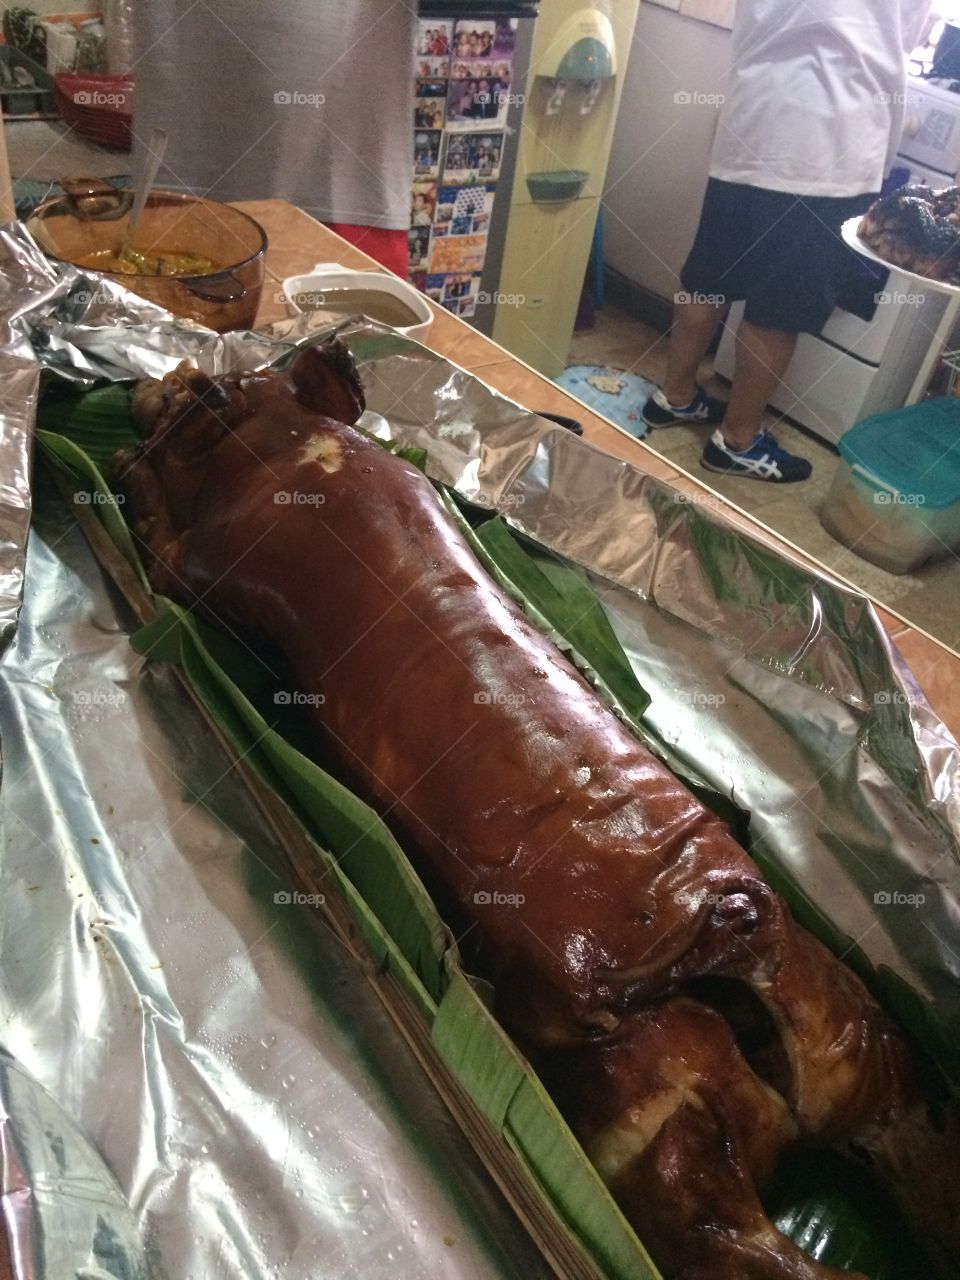 this is a roasted pig locally know as "lechon". This is seved mostly during fiestas and biethday celebrations together beer. The skin is very crispy